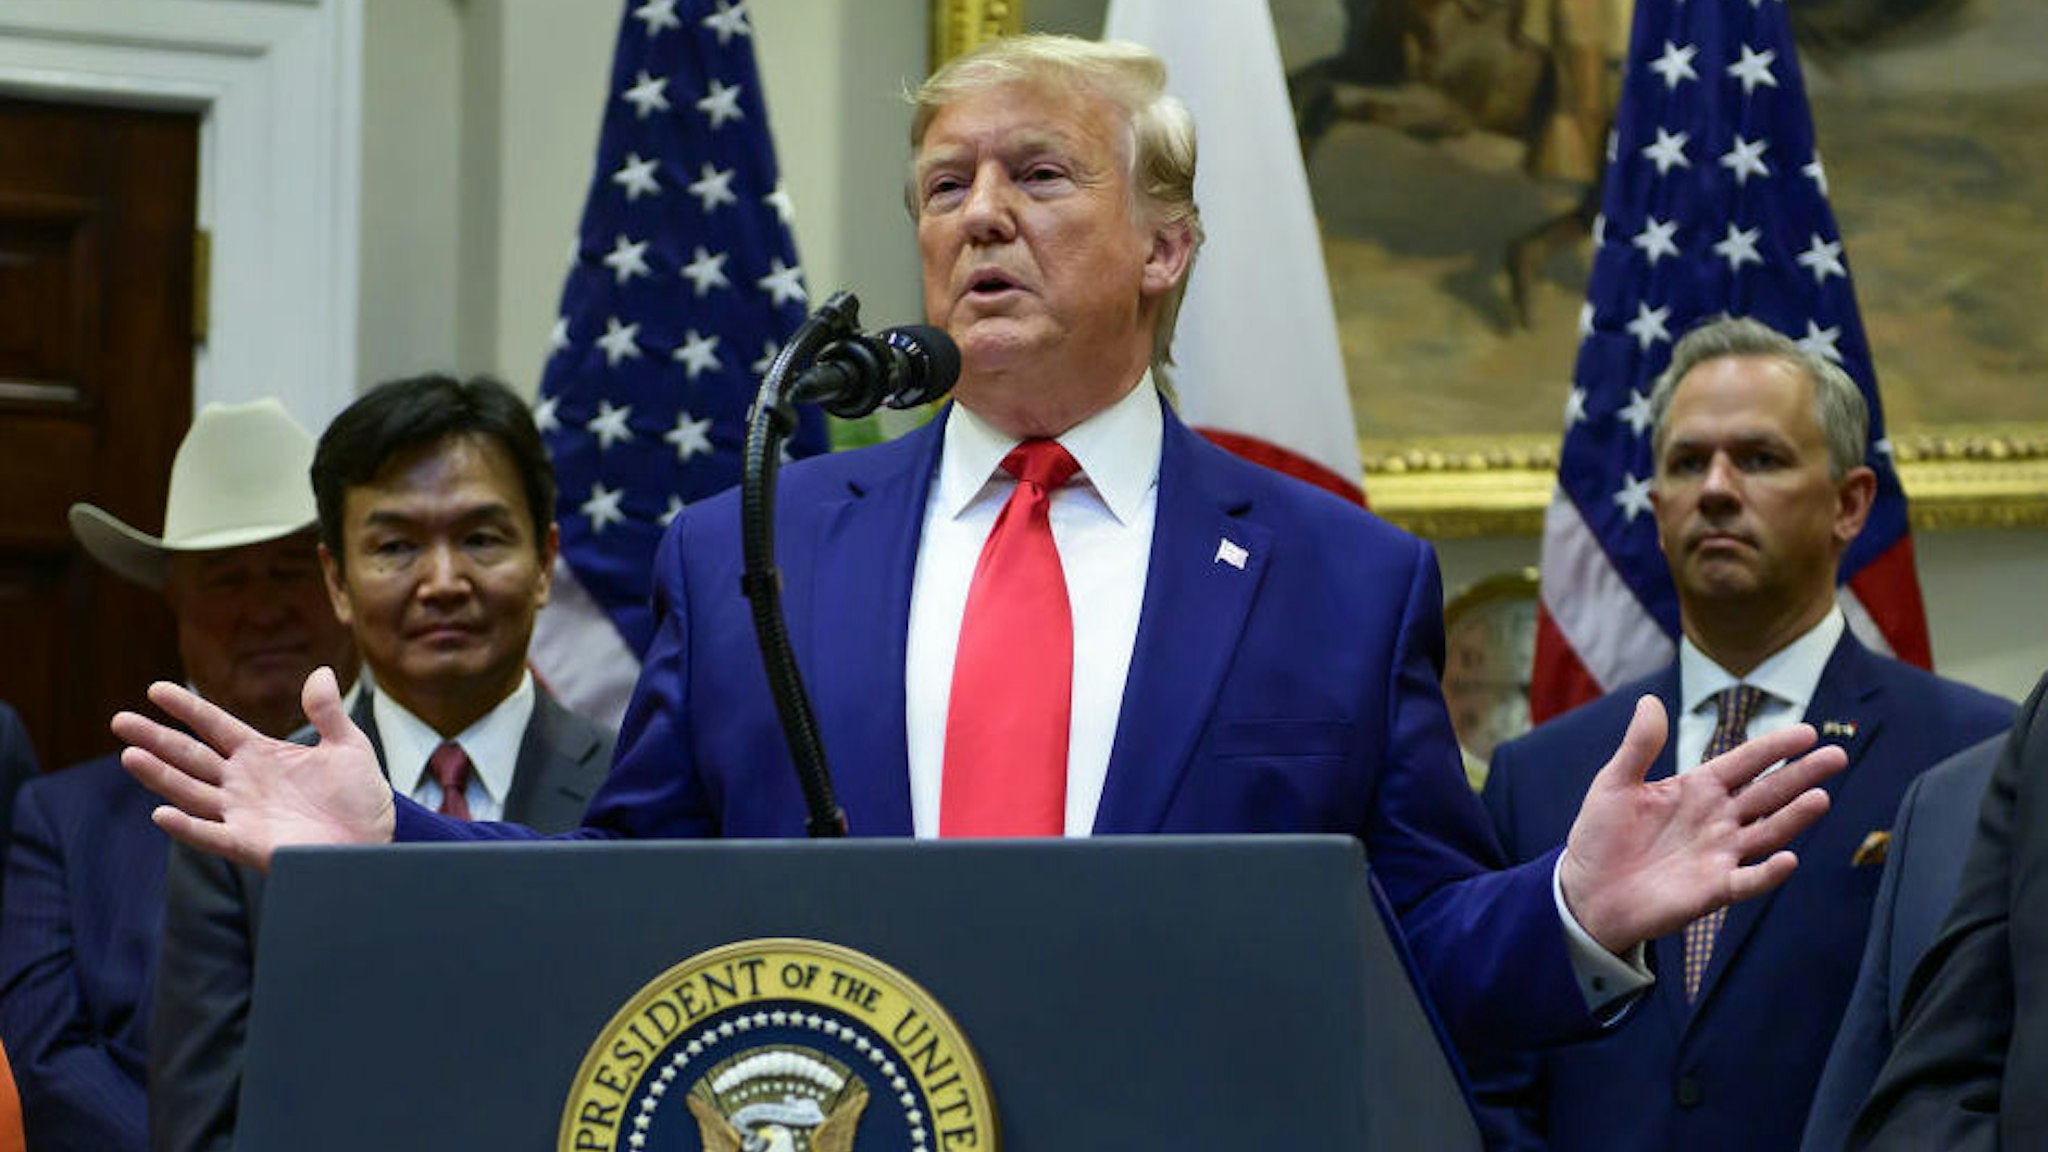 U.S. President Donald Trump speaks during a signing ceremony for the U.S.-Japan Trade Agreement and U.S.-Japan Digital Trade Agreement in the Roosevelt Room of the White House in Washington, D.C., U.S., on Monday, Oct. 7, 2019. The U.S. and Japan signed a limited trade deal intended to boost markets for American farmers and give Tokyo assurances, for now, that Trump won't impose tariffs on auto imports. Photographer: Ron Sachs/CNP/Bloomberg